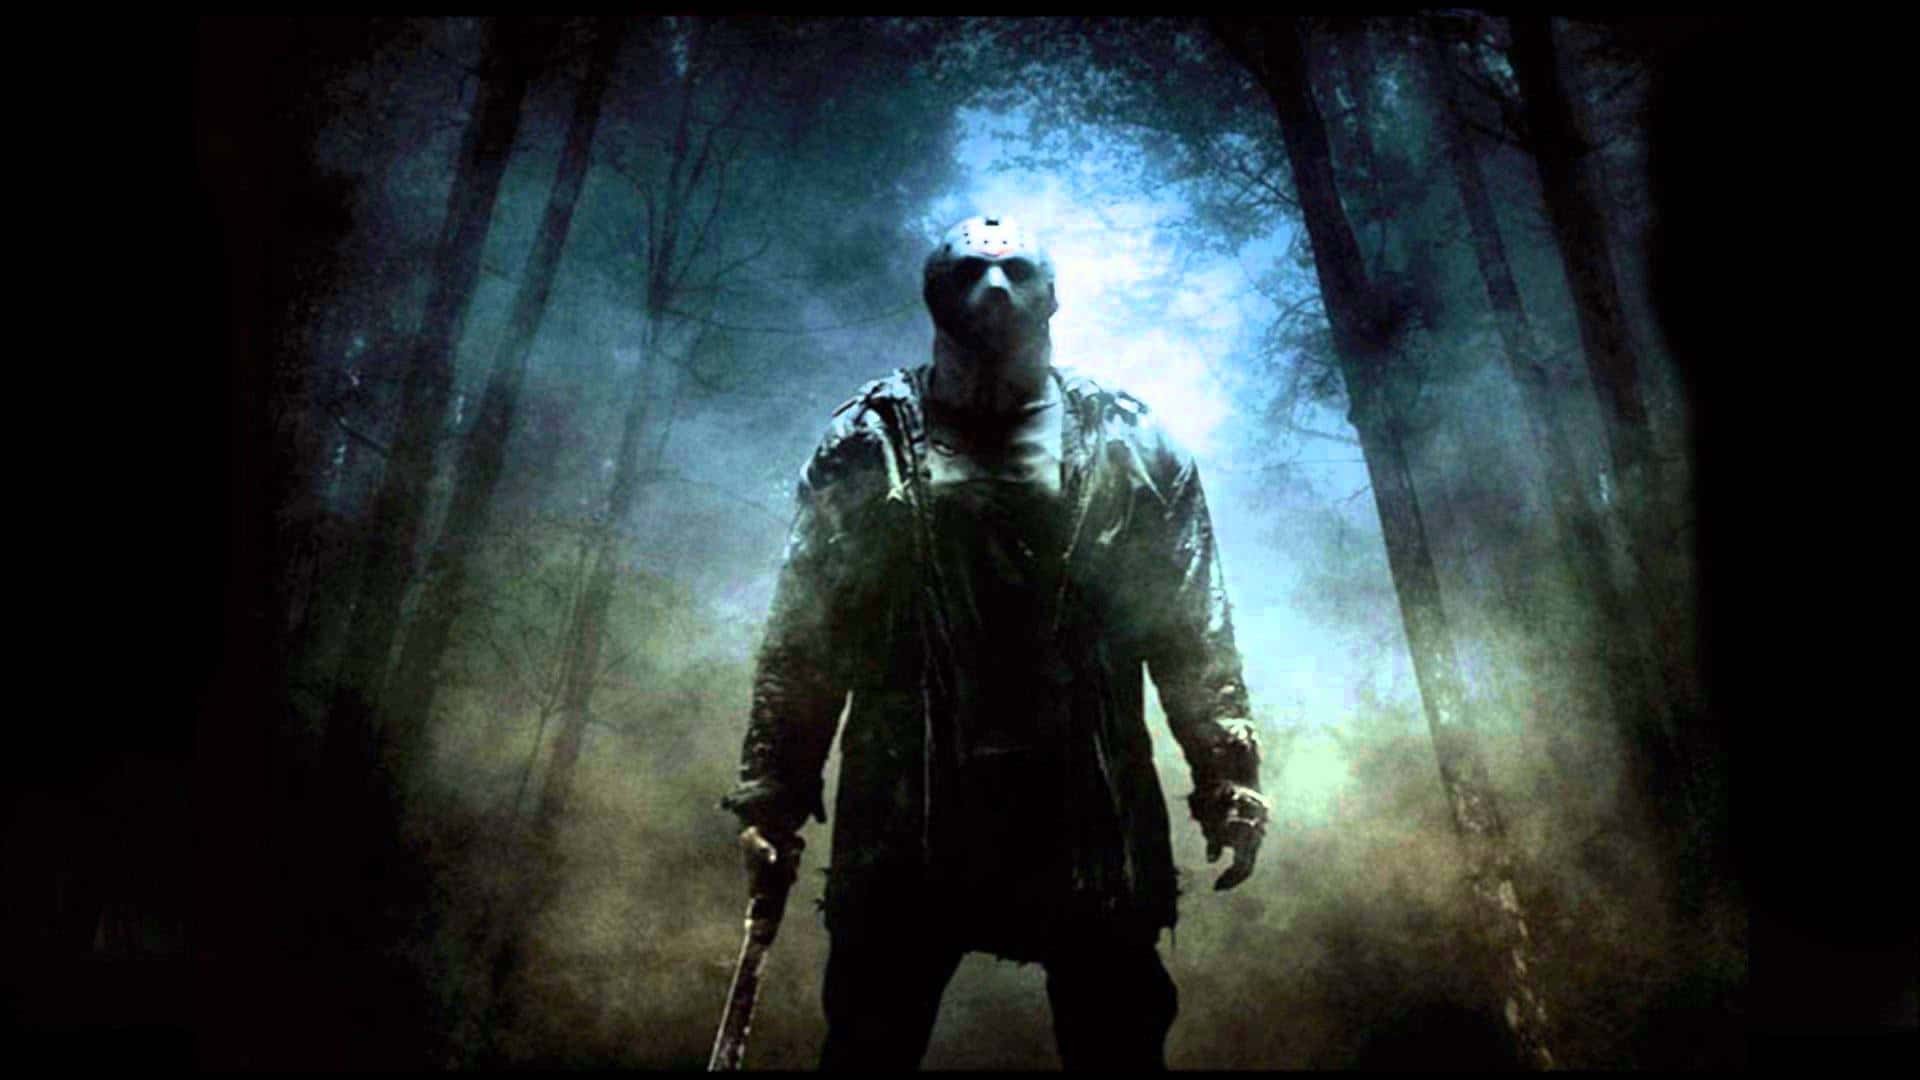 1920x1080 This most recent try at making a Friday the 13th GTA V crossover is  possibly the most impressive of them all, capturing the atmosphere and  visual style of ...